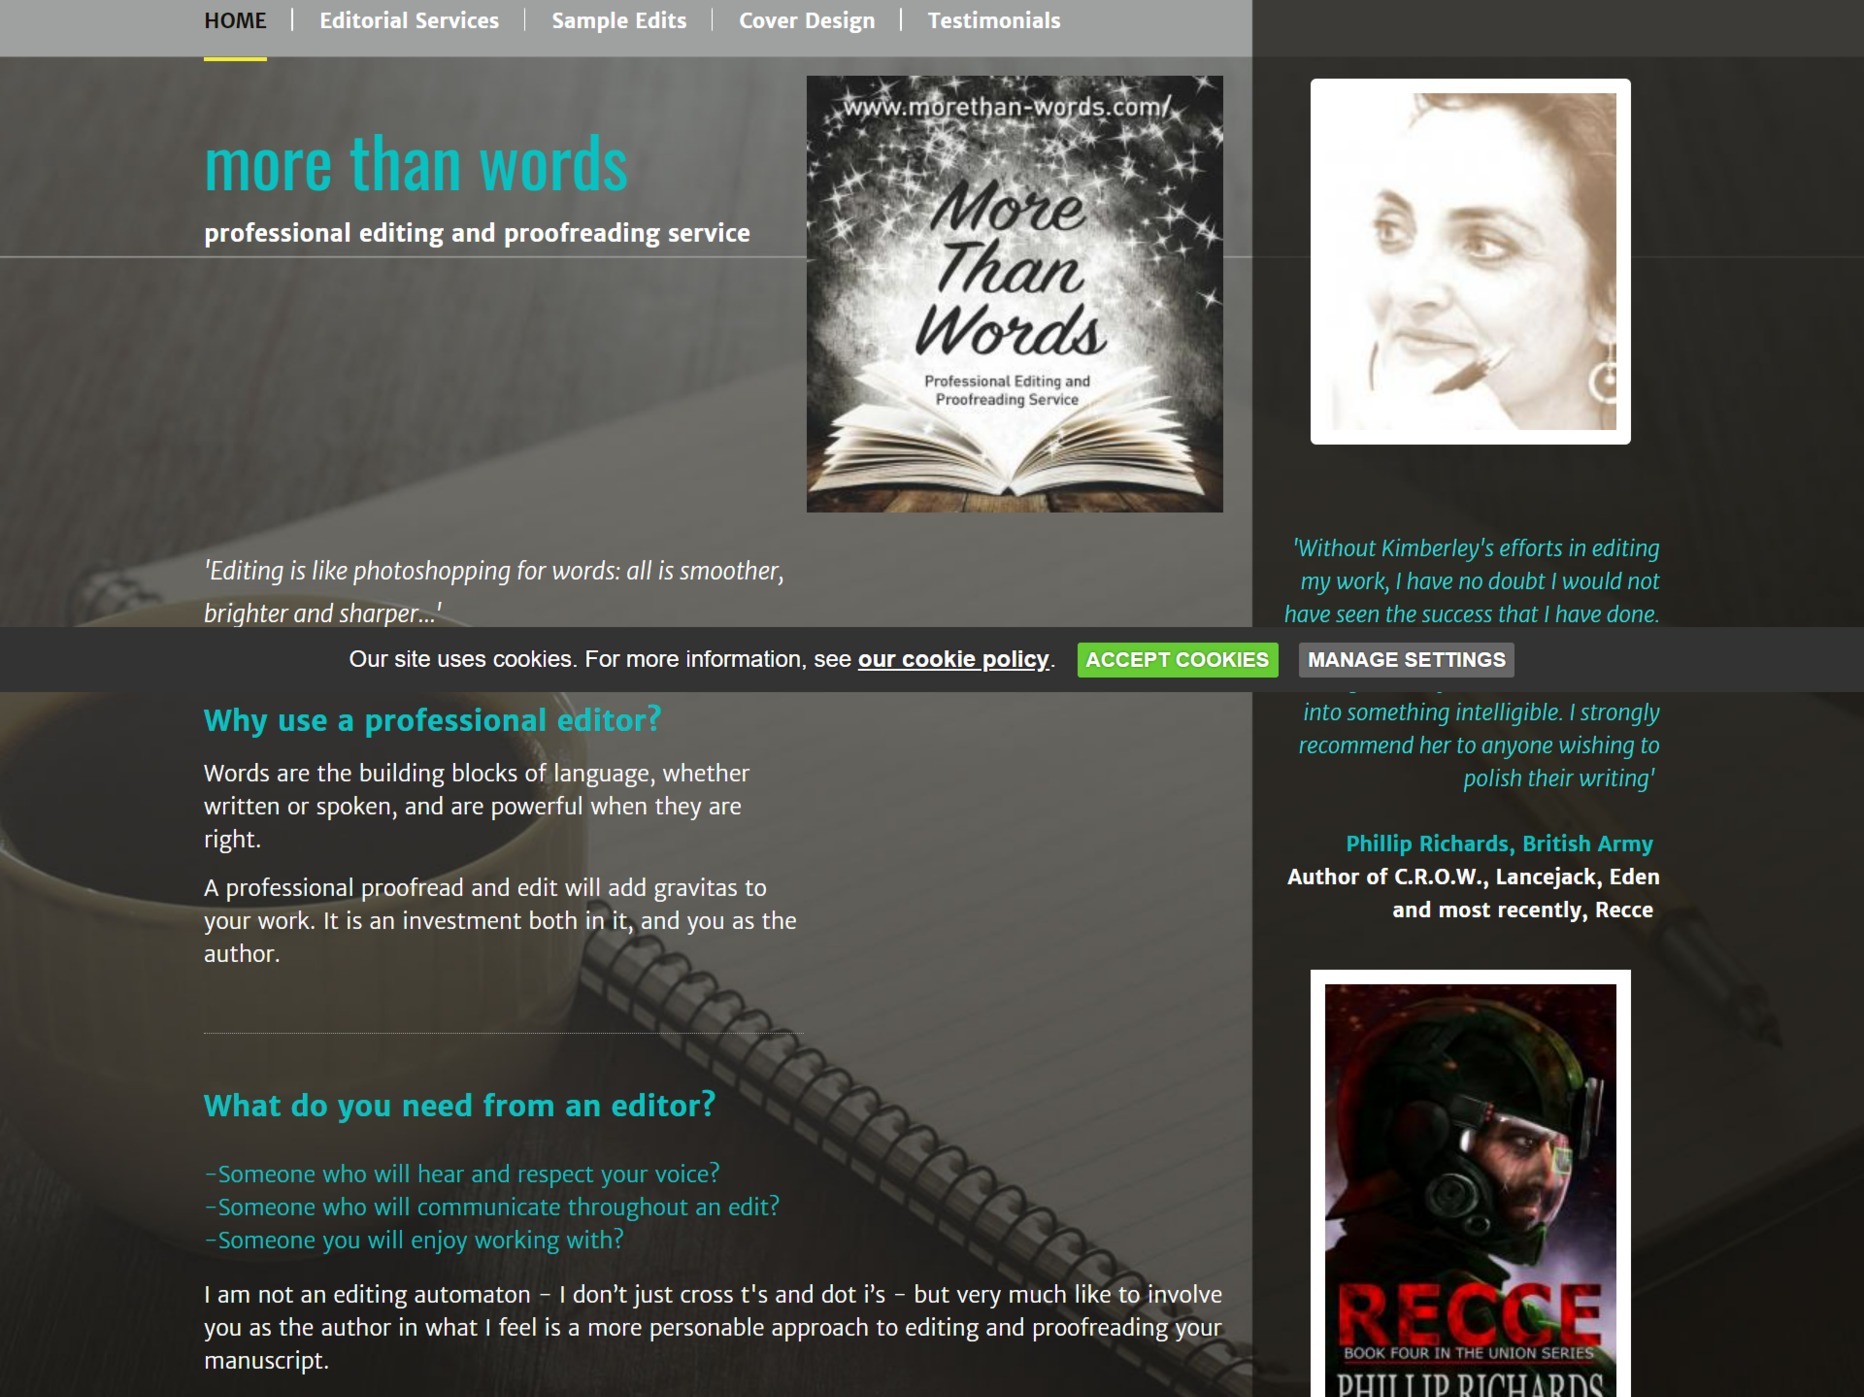 The previous website belonging to More Than Words